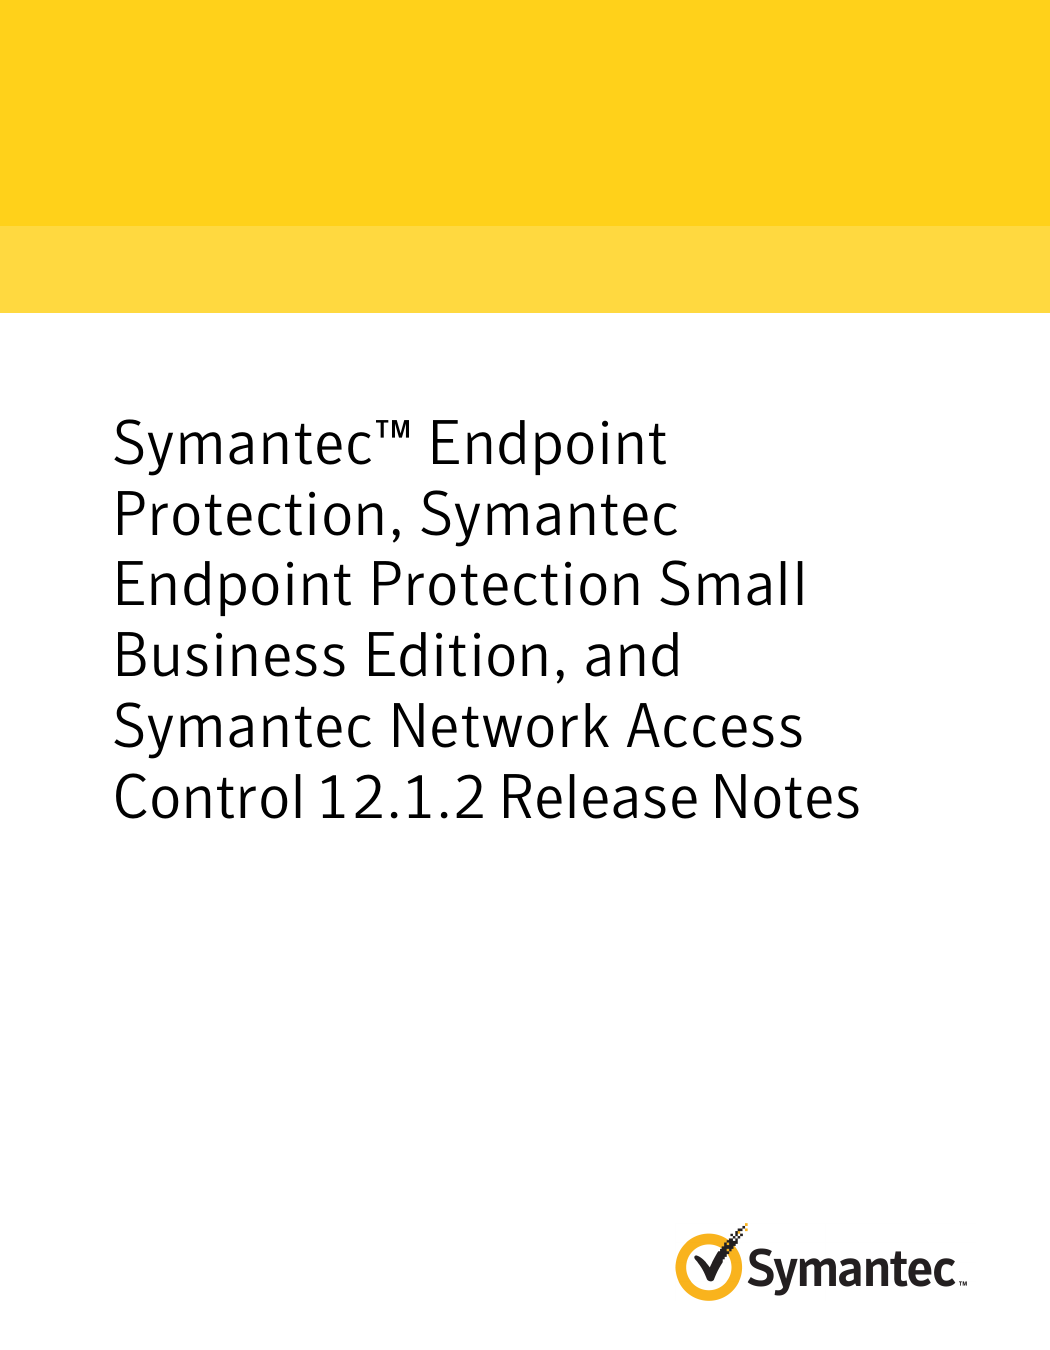 symantec endpoint protection manager 14 password reset tool download